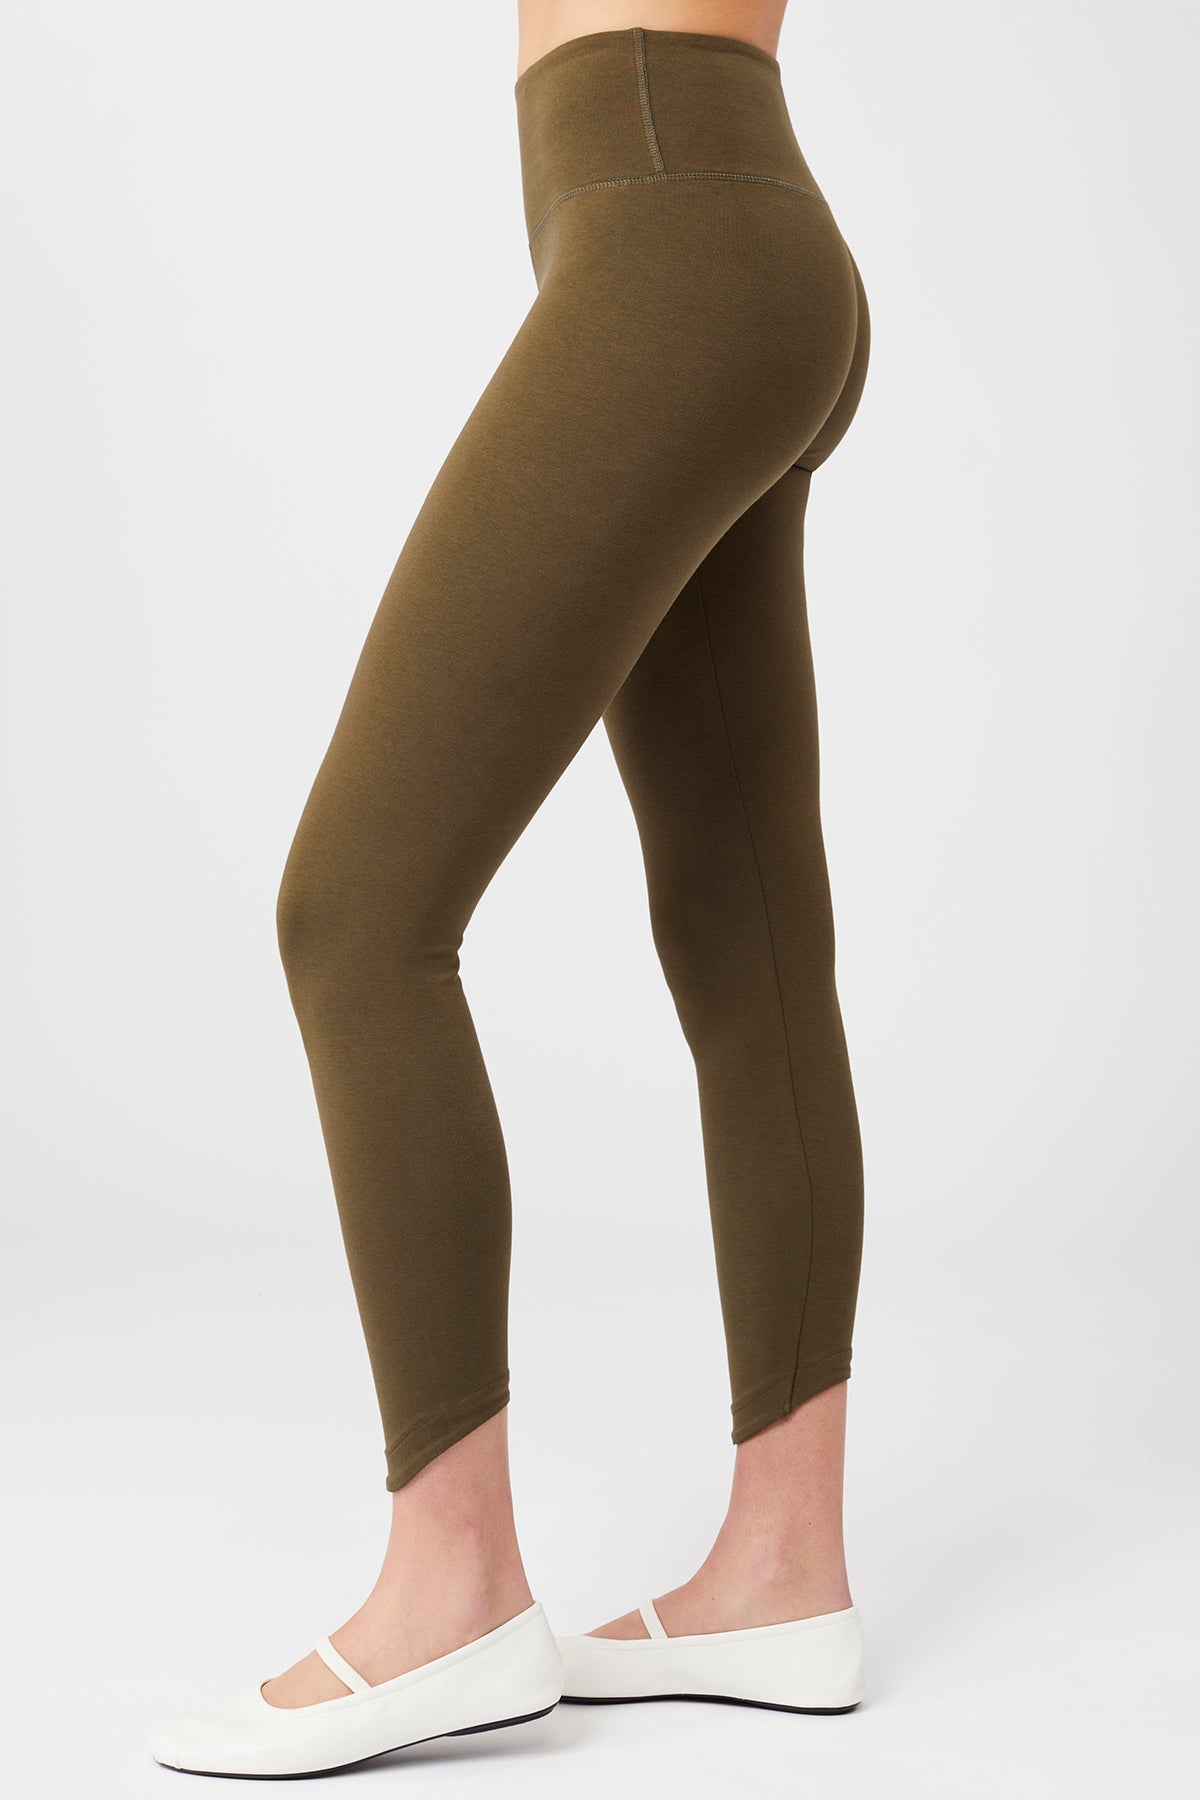 Spanx Look At Me Now Cropped Leggings